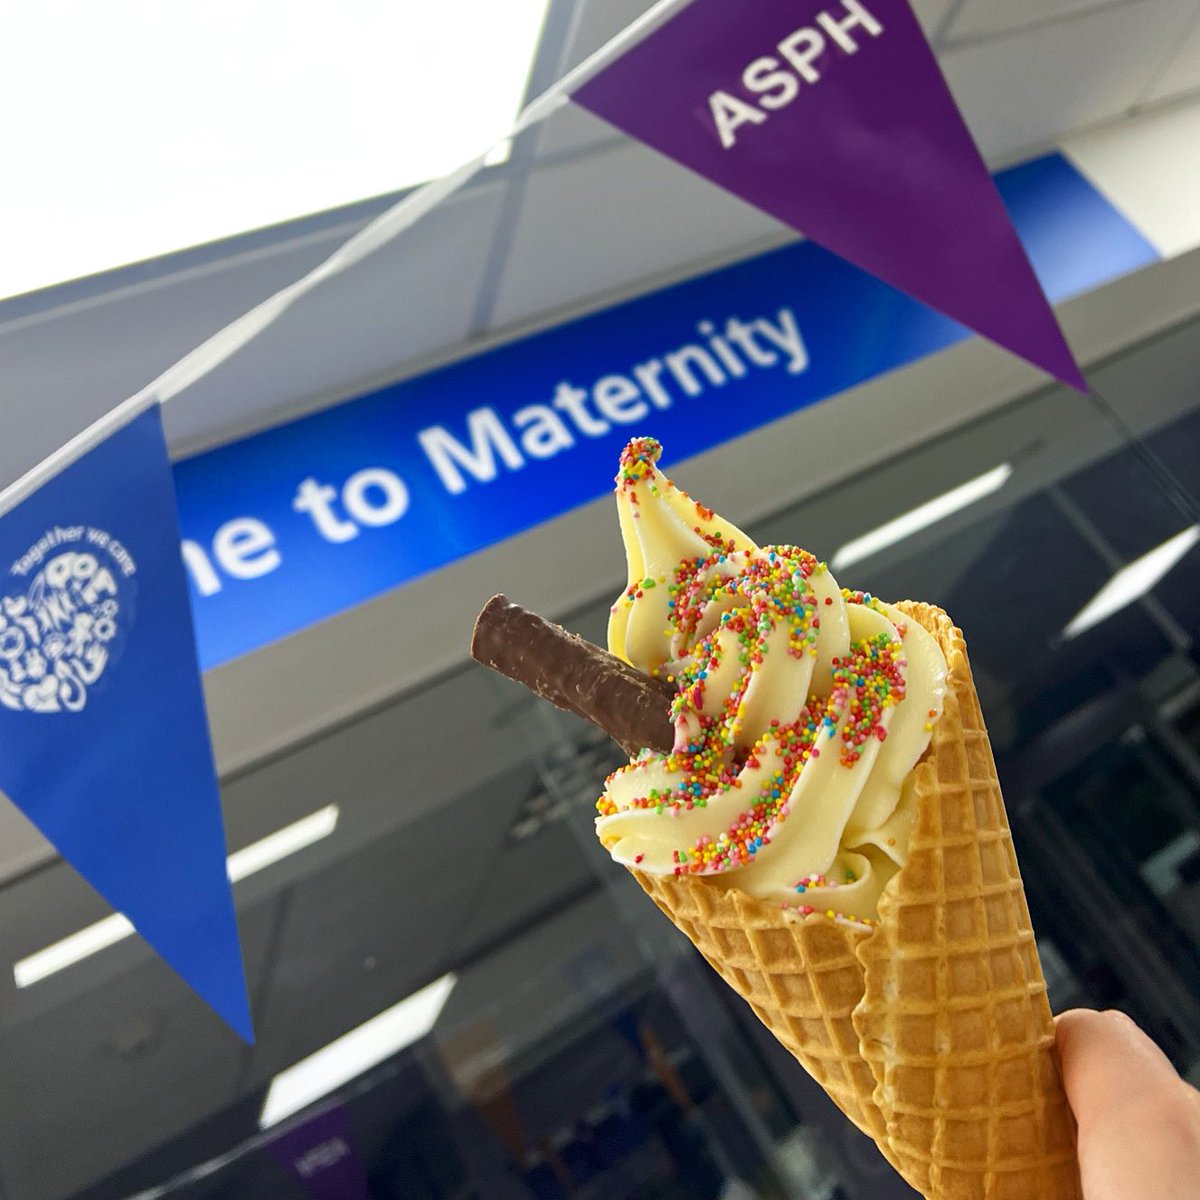 Today we are celebrating the 10th Birthday of Abbey Birth Centre. Today is also International Day of the Midwife. We are here serving ice creams and feel proud to be supporting the Maternity Department @asphft @ASPH_maternity #idm2024